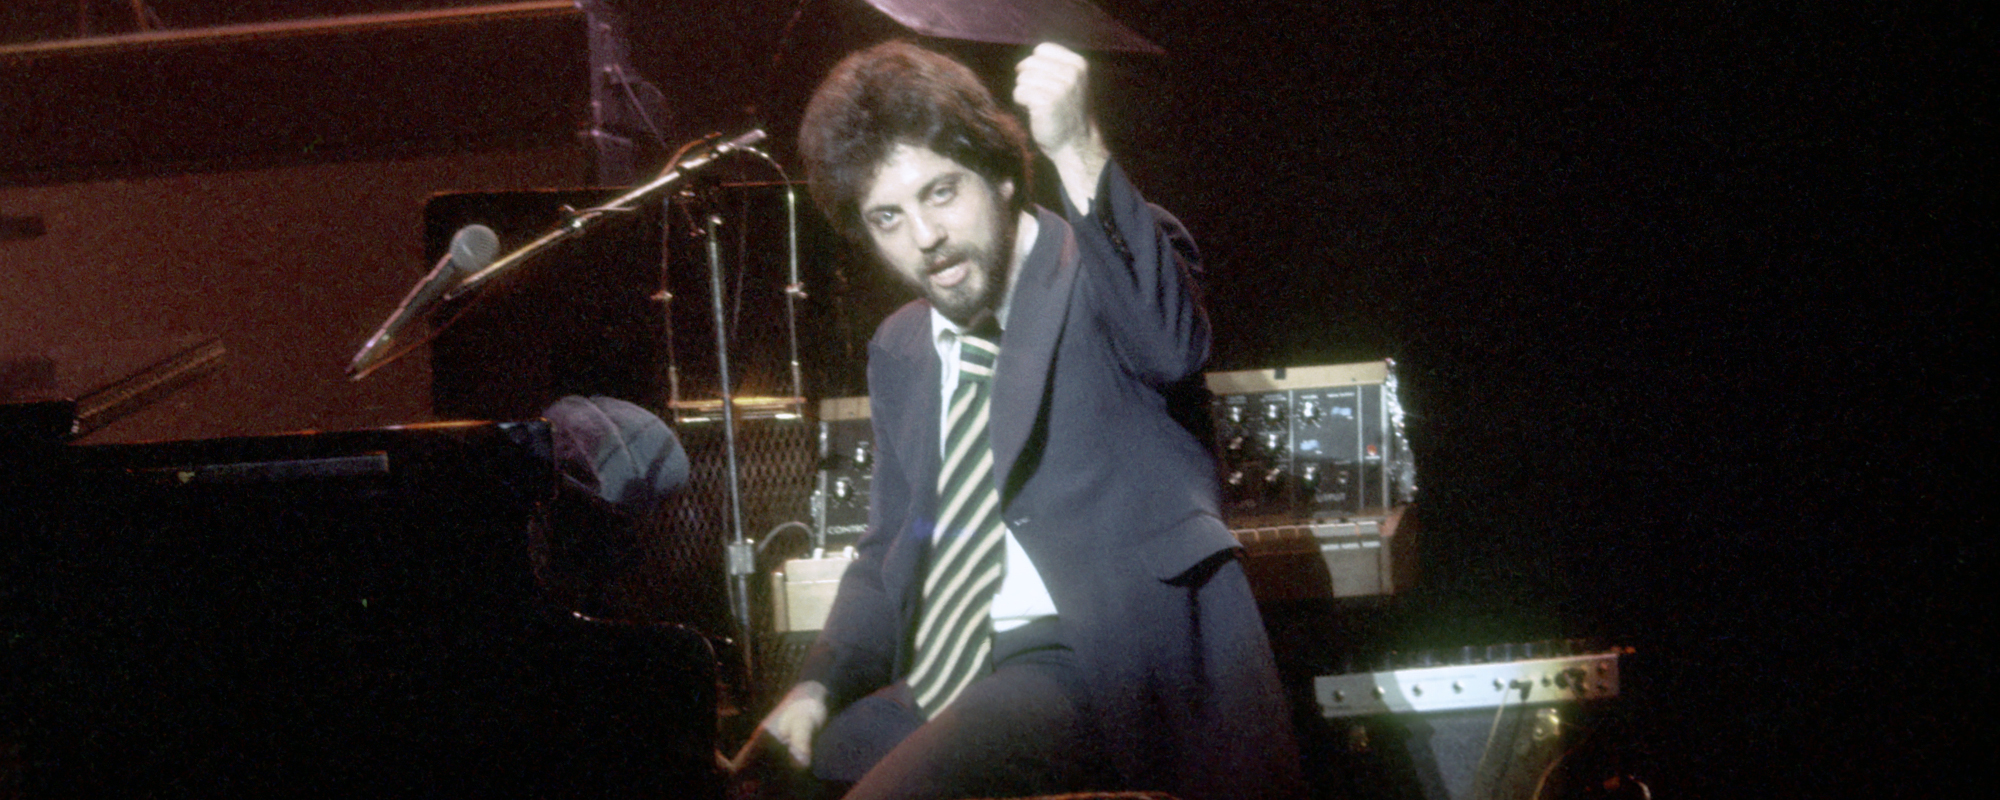 Ranking the 5 Best Songs on Billy Joel’s Farewell Album ‘River of Dreams’